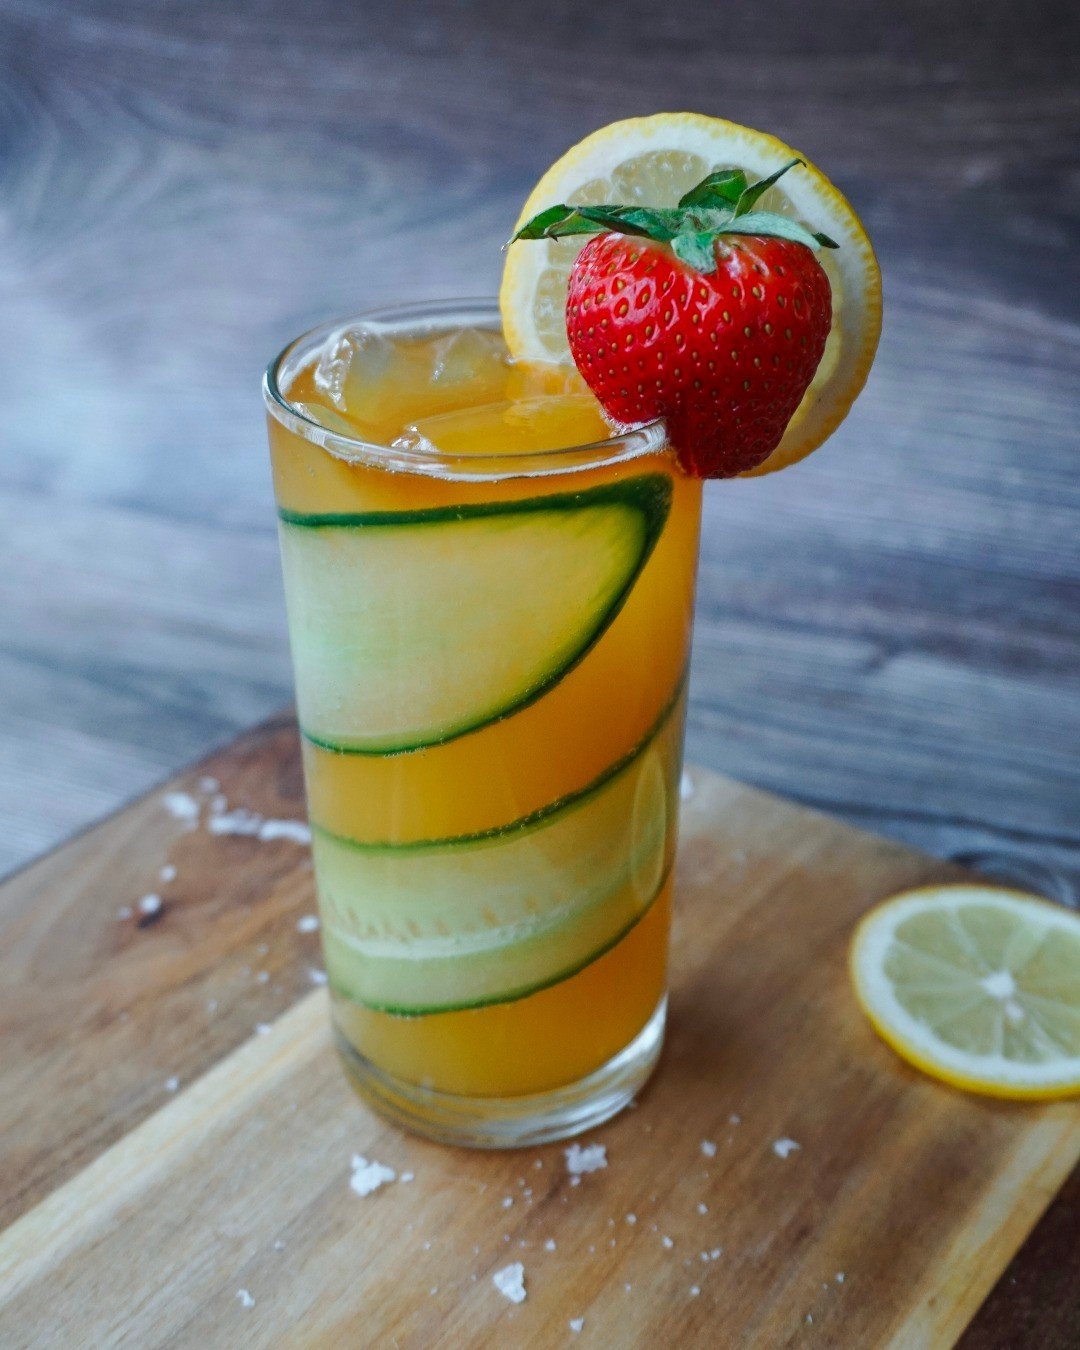 Cheers to World Cocktail Day! 🍹✨ Celebrate with our refreshing Pimm's Cup, crafted with Pimm's No.1, lemon juice, ginger ale, fresh strawberries, lemon, and cucumber. A perfect blend of flavors to elevate your day! 🌿🍓 

Product @pimmsaustralia @ca